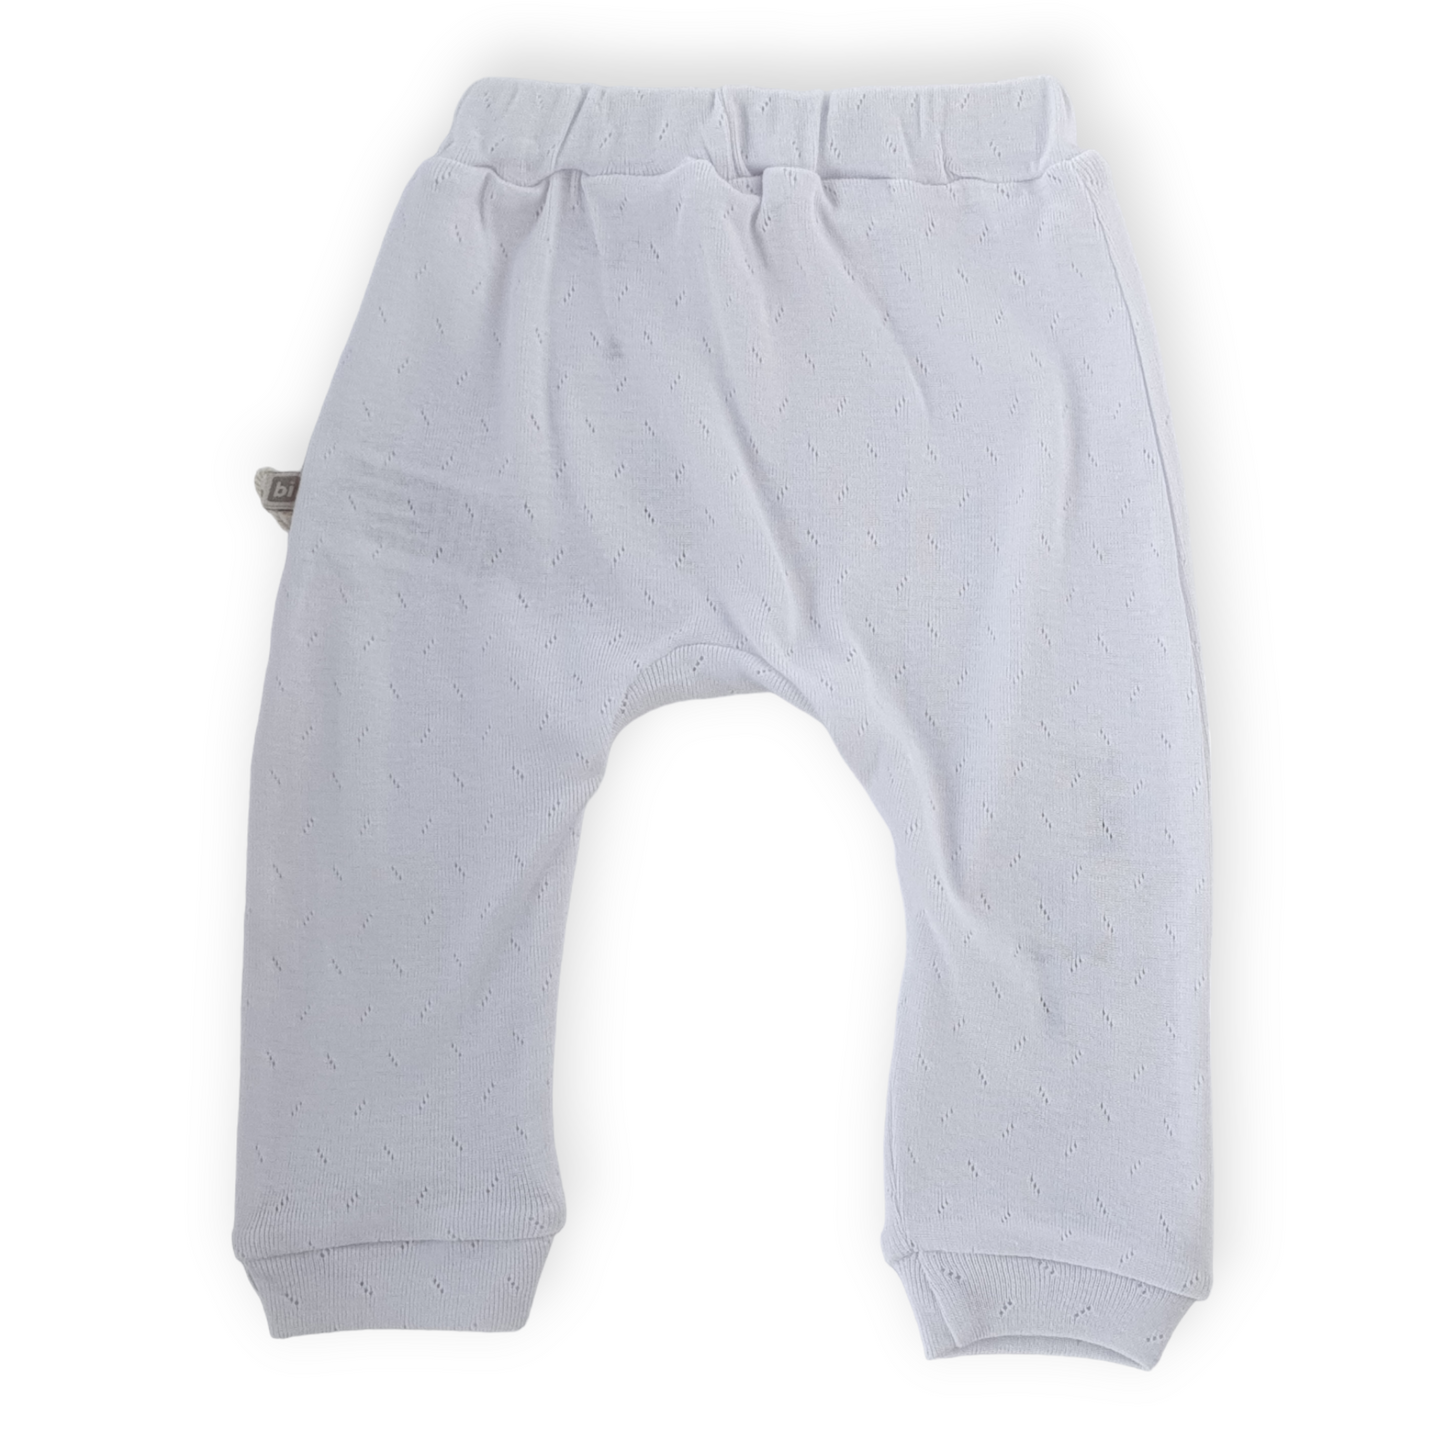 Basic White Footless Pants with Elephants